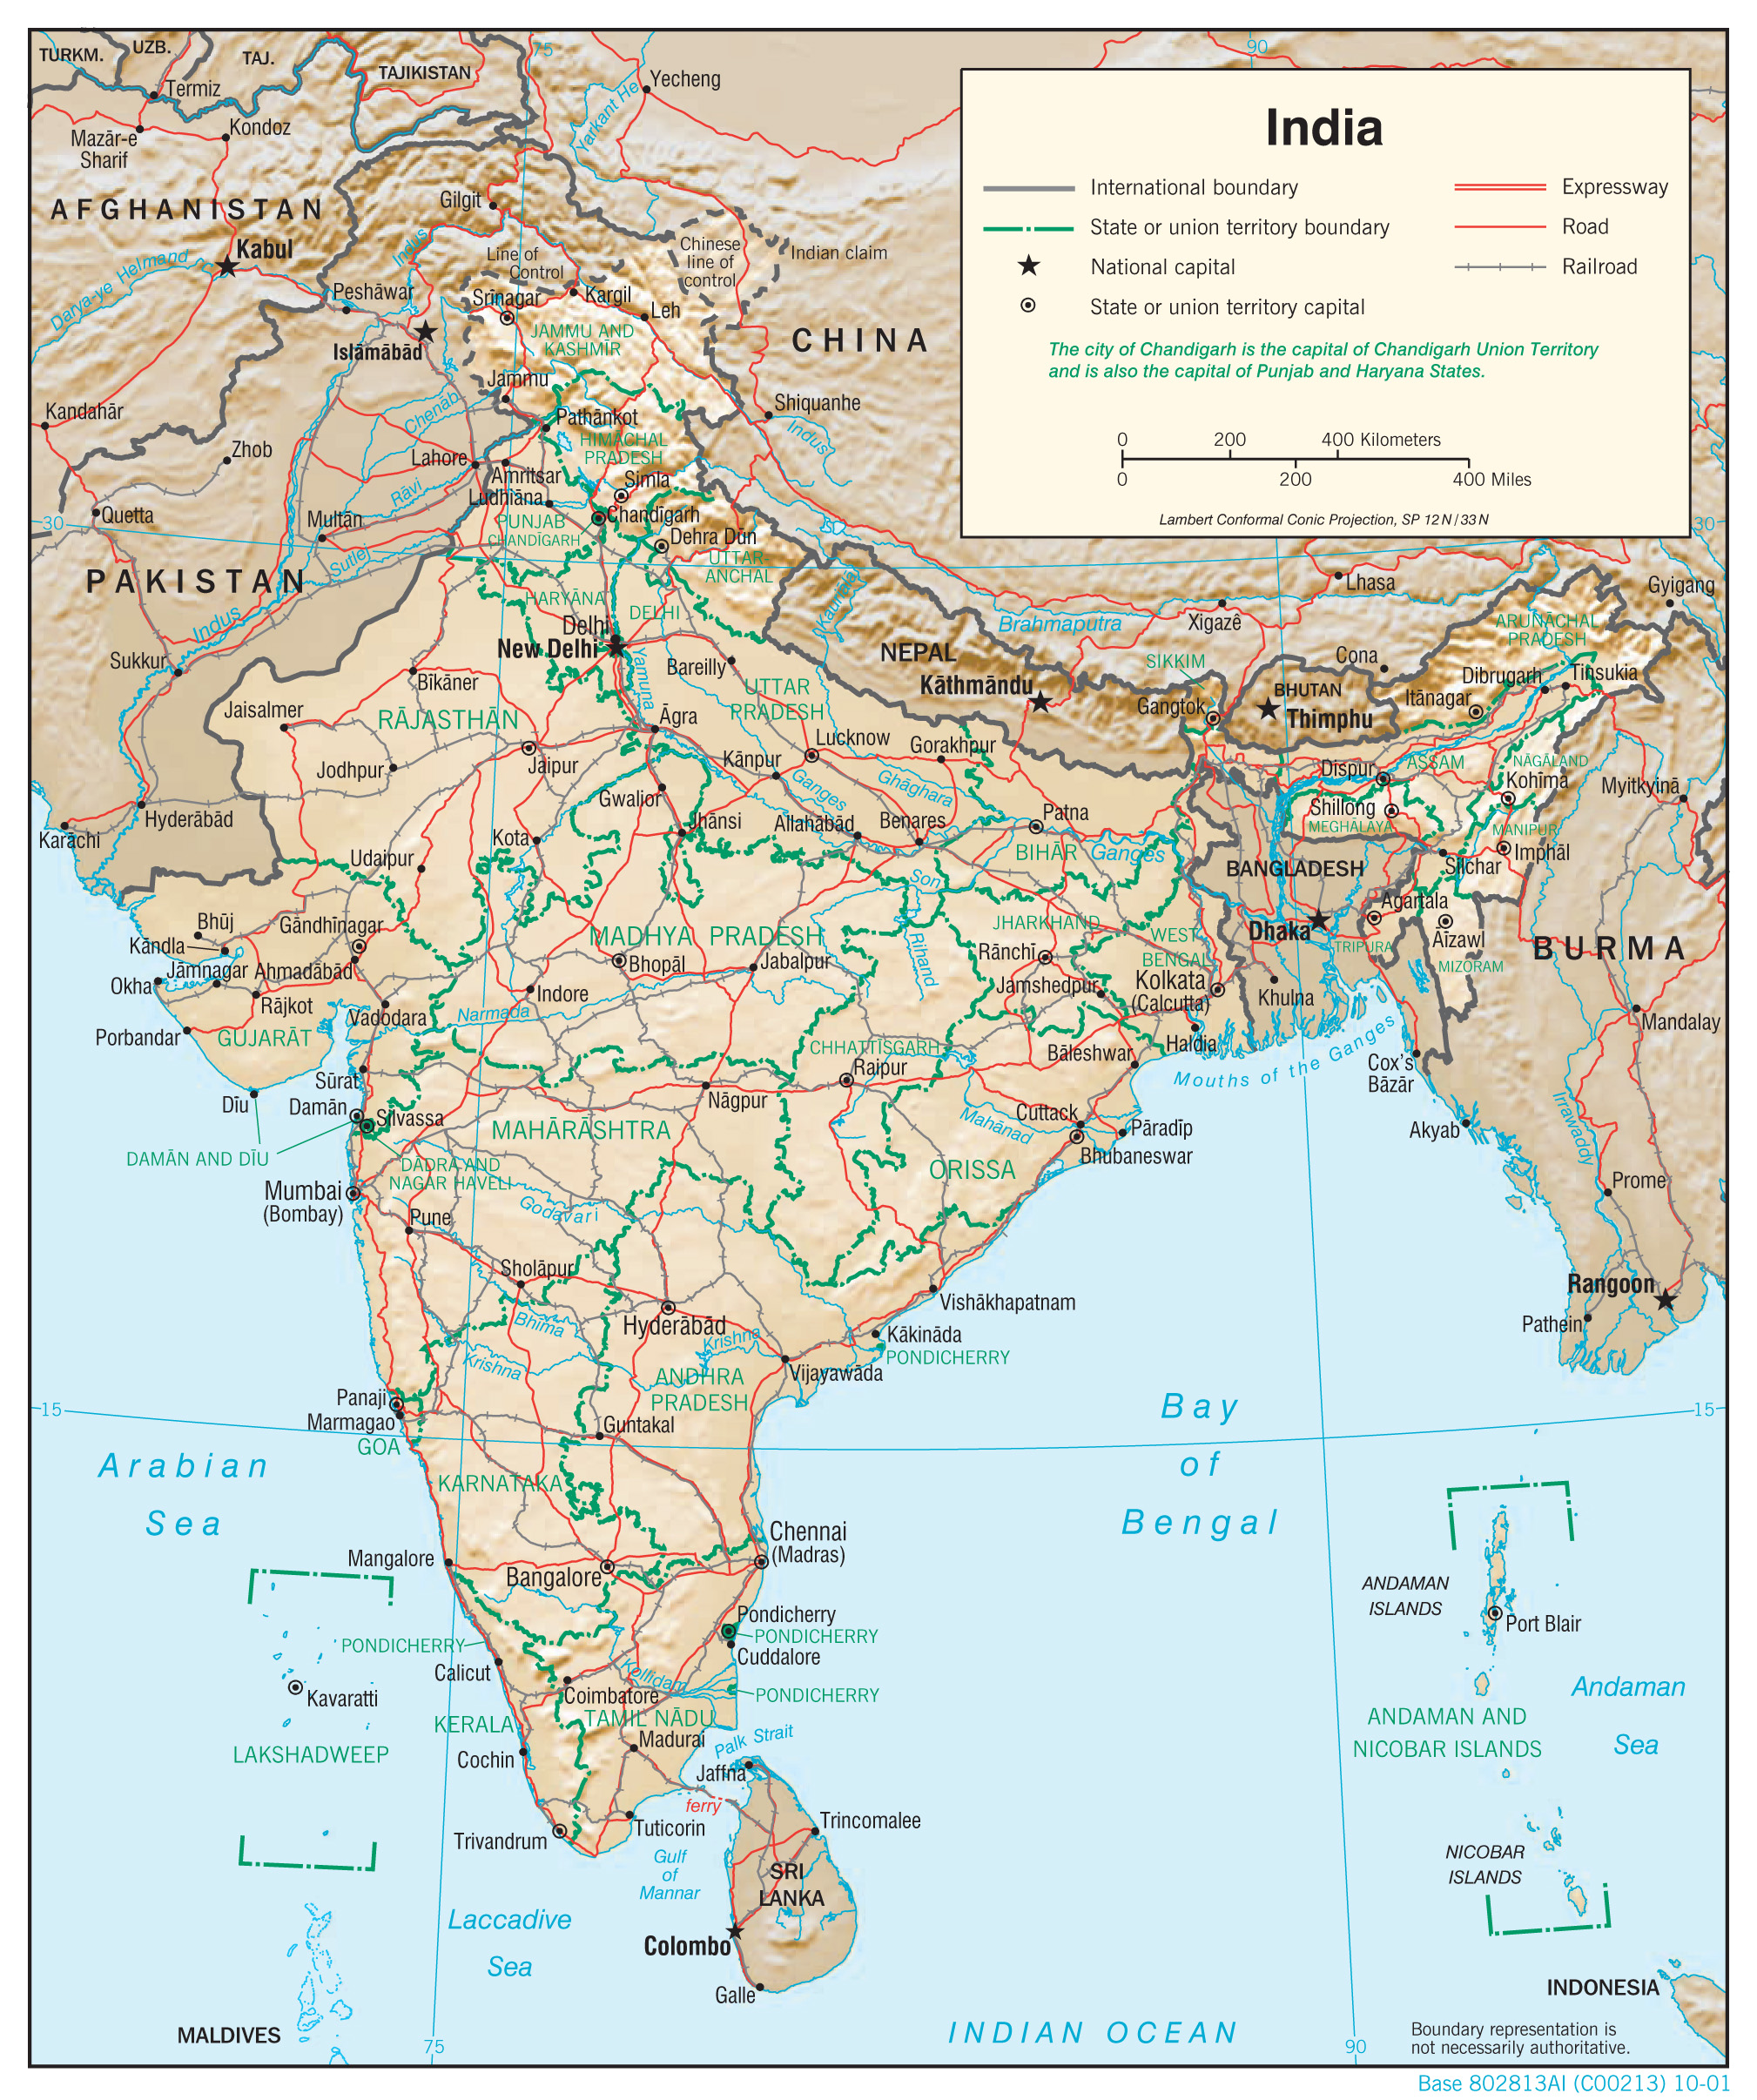 India Maps - Perry-Castañeda Map Collection - UT Library Online